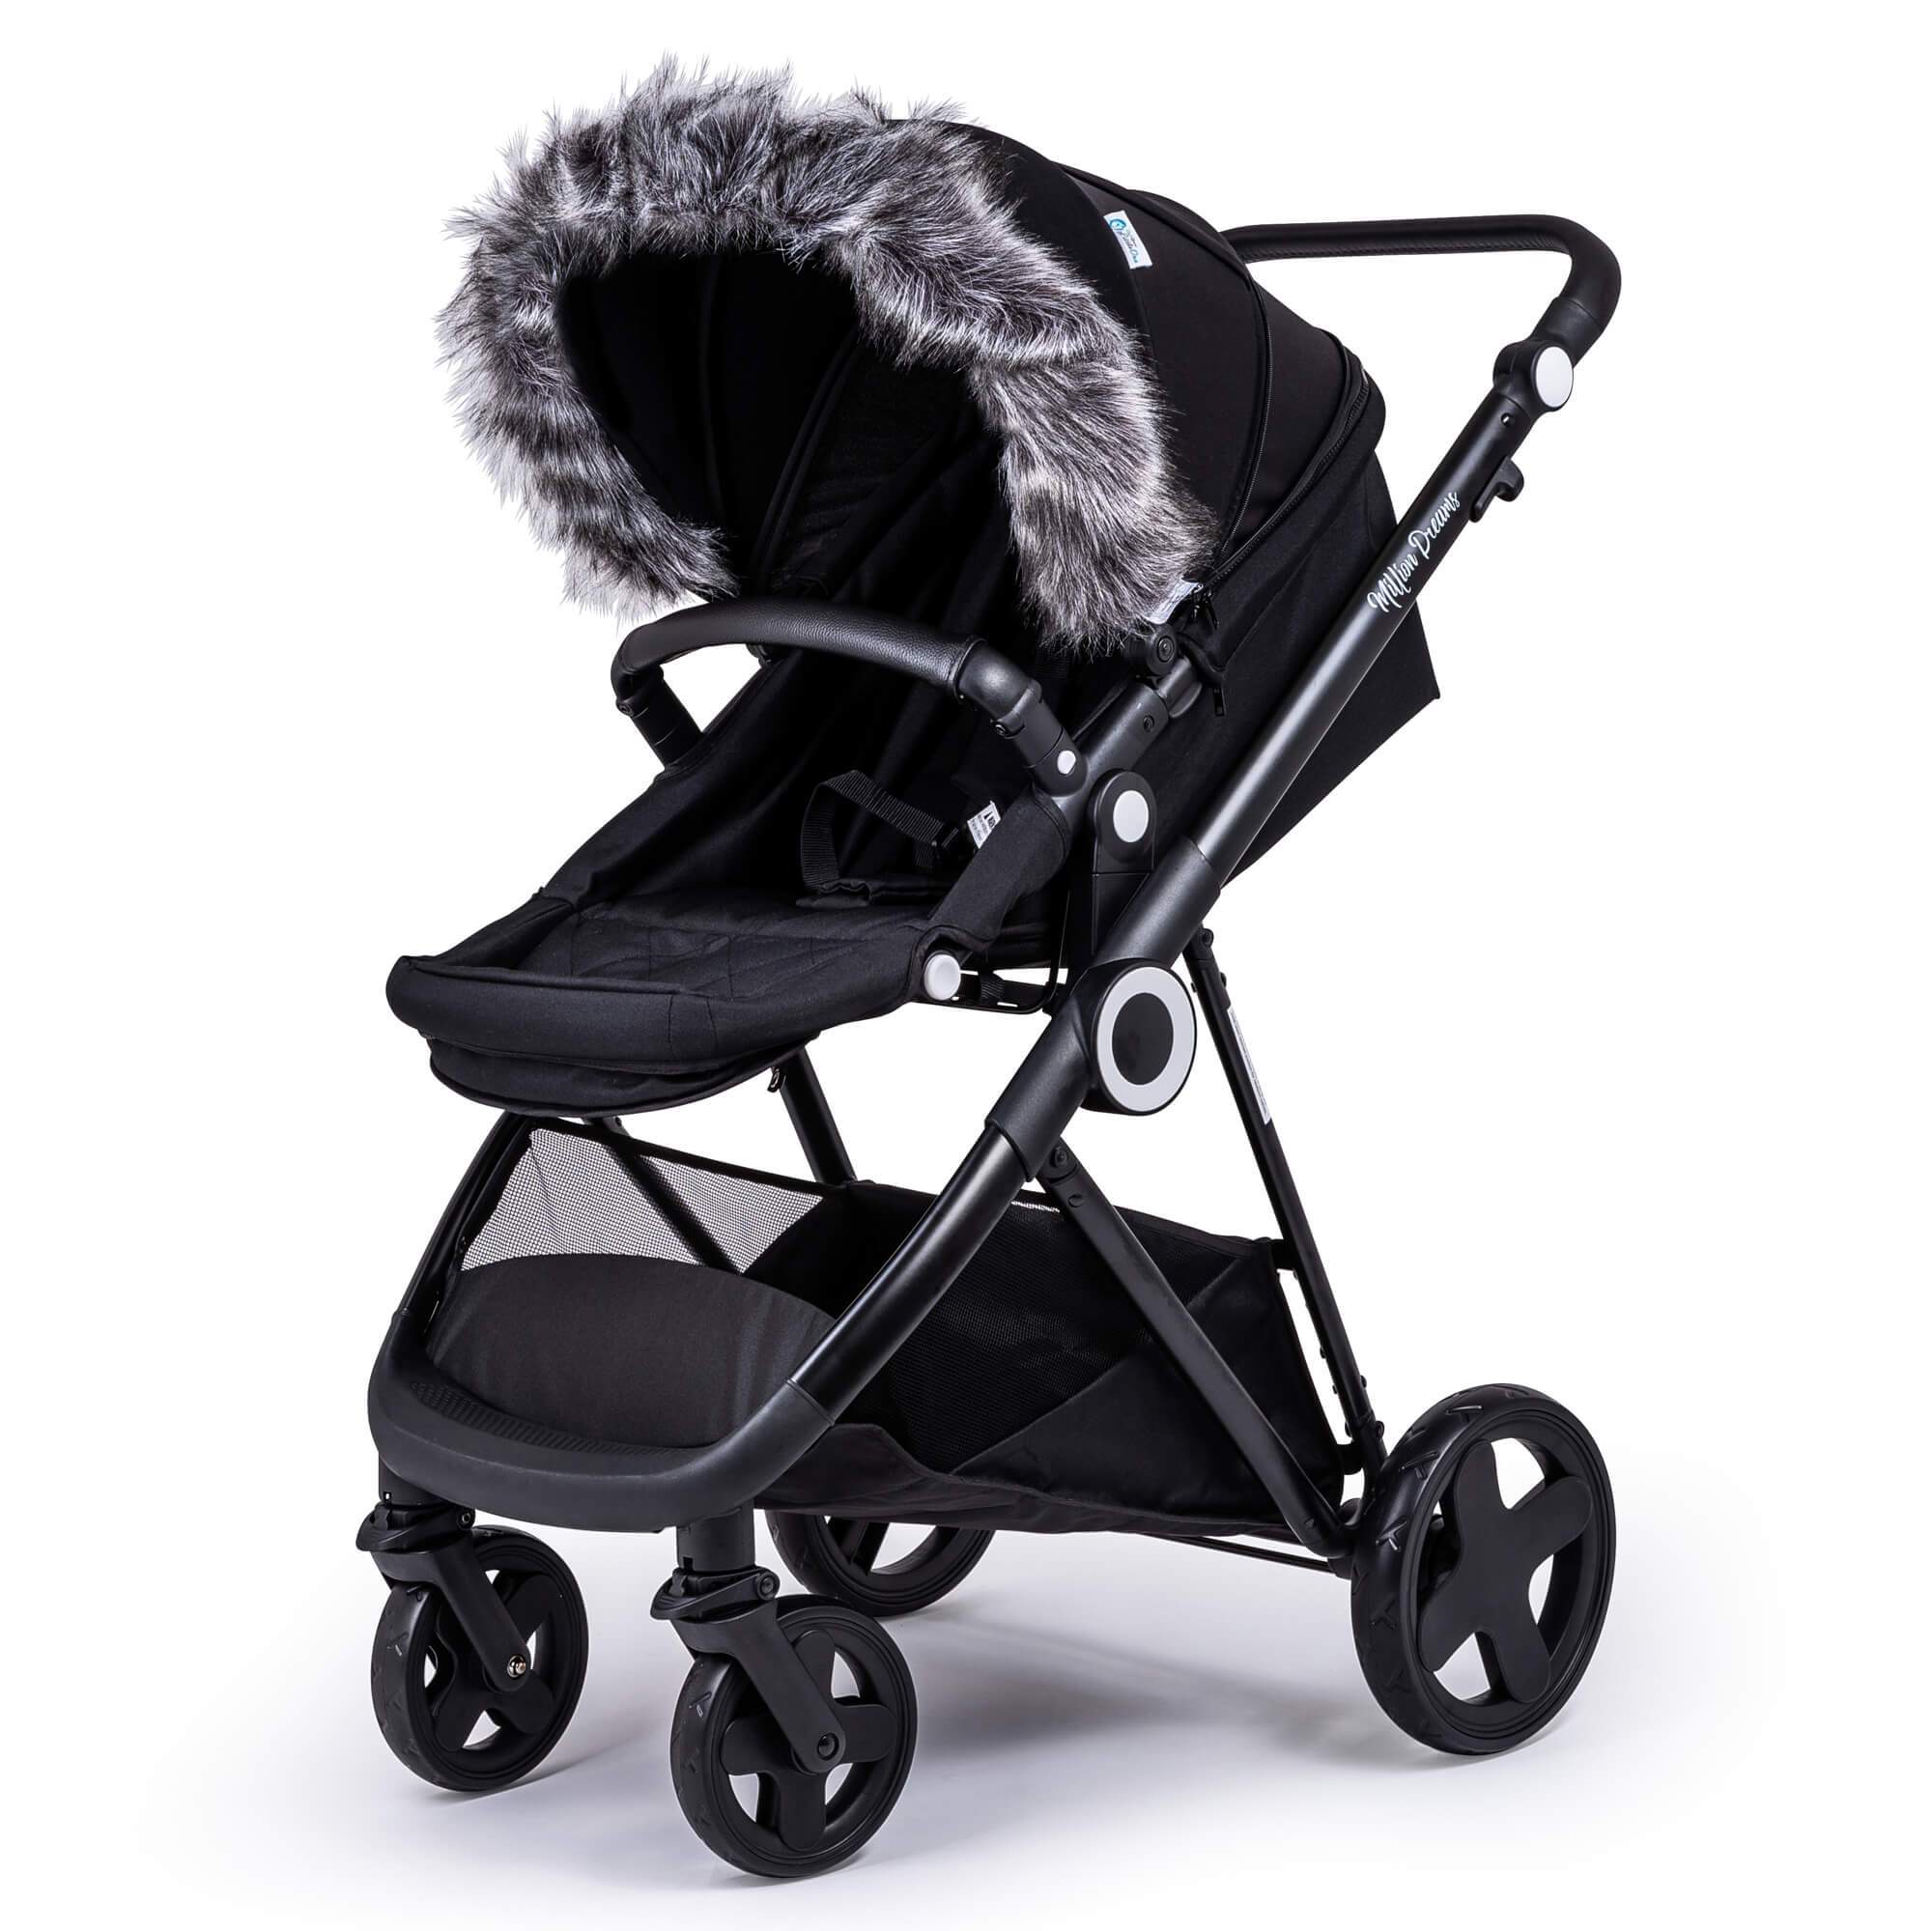 Pram Fur Hood Trim Attachment for Pushchair Compatible with Babyzen - Dark Grey / Fits All Models | For Your Little One